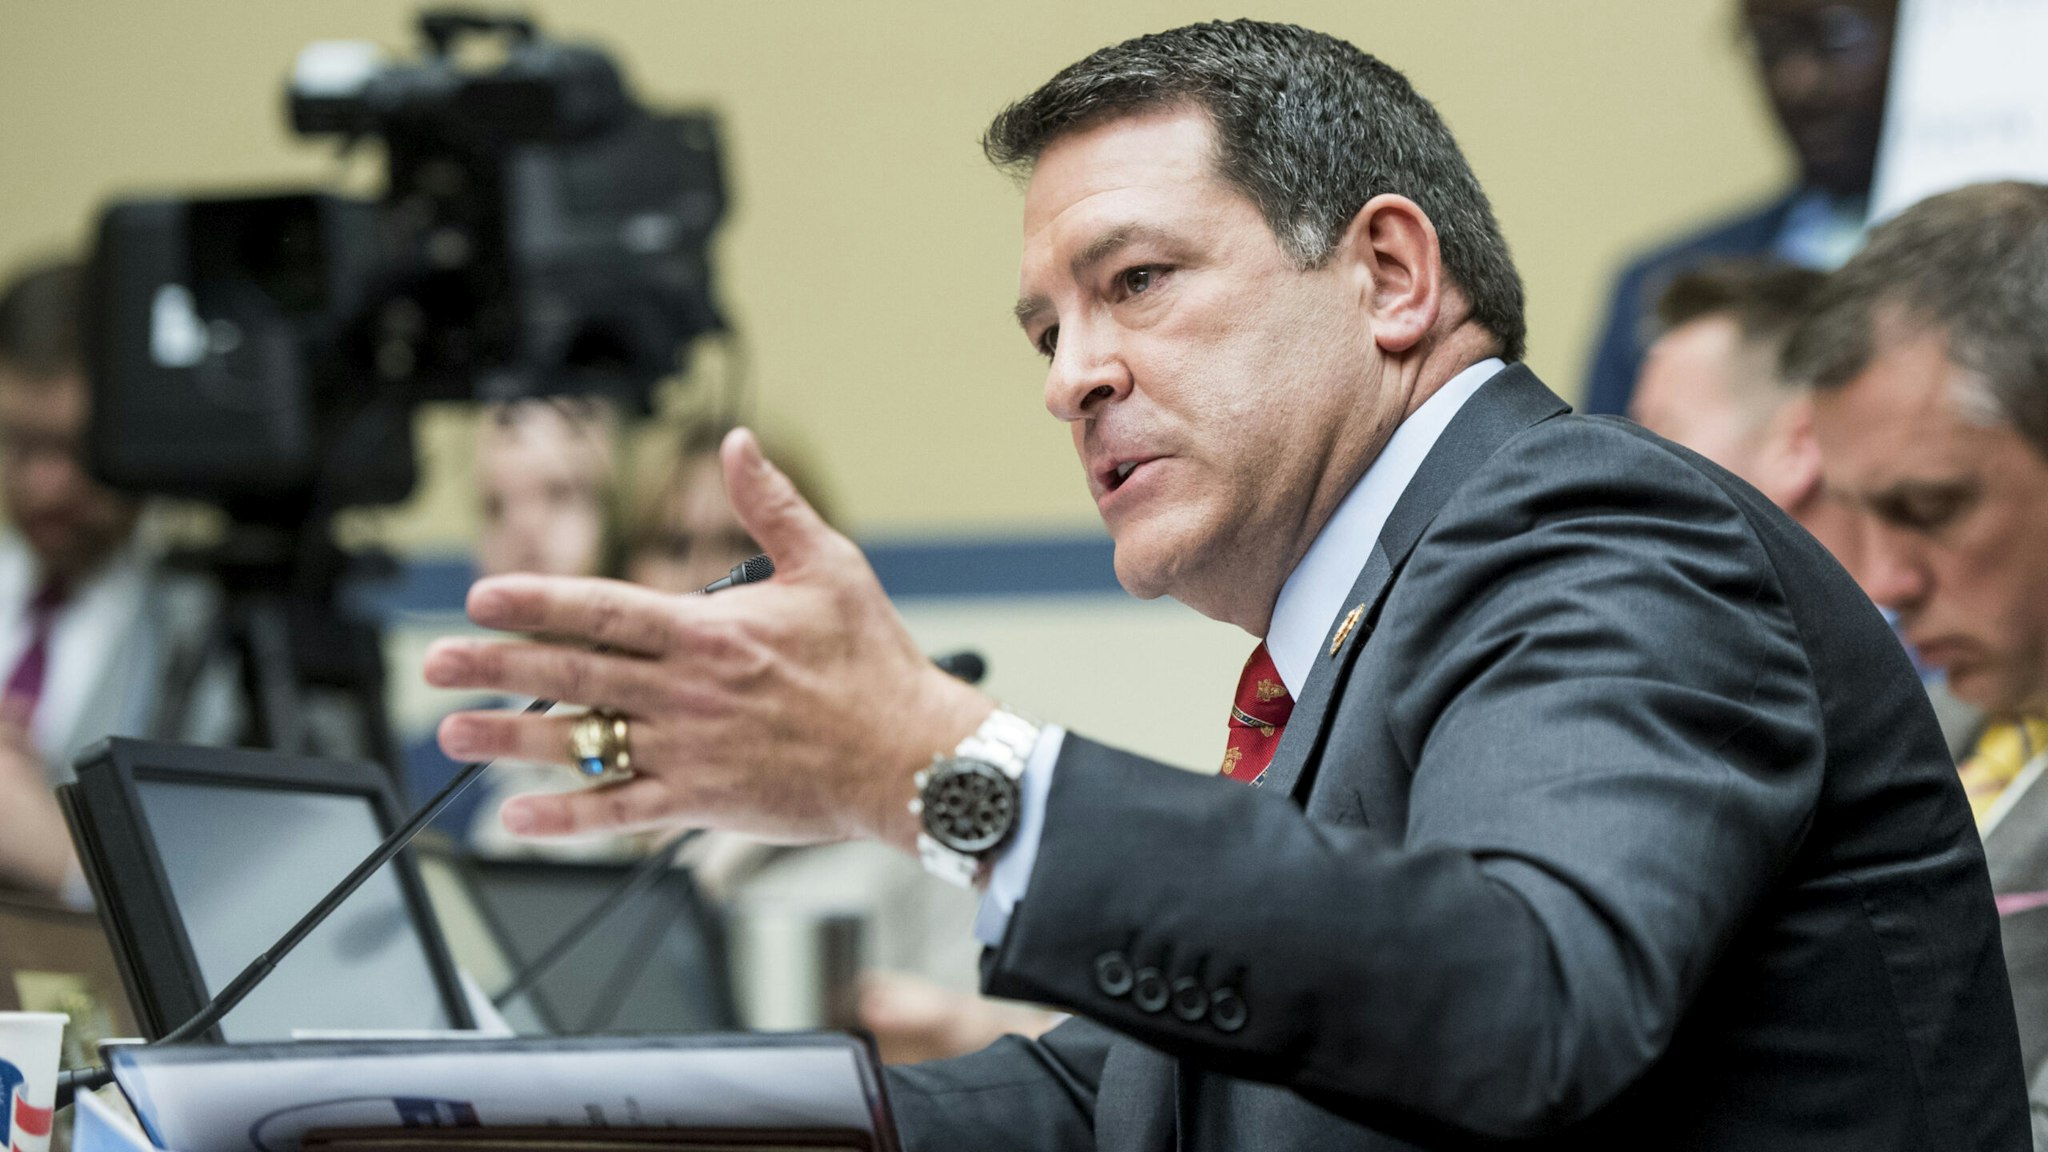 UNITED STATES - FEBRUARY 27: Rep. Mark Green, R-Tenn., questions Michael Cohen, former attorney for President Donald Trump, during the House Oversight and Reform Committee hearing on Russian interference in the 2016 election on Wednesday, Feb. 27, 2019.